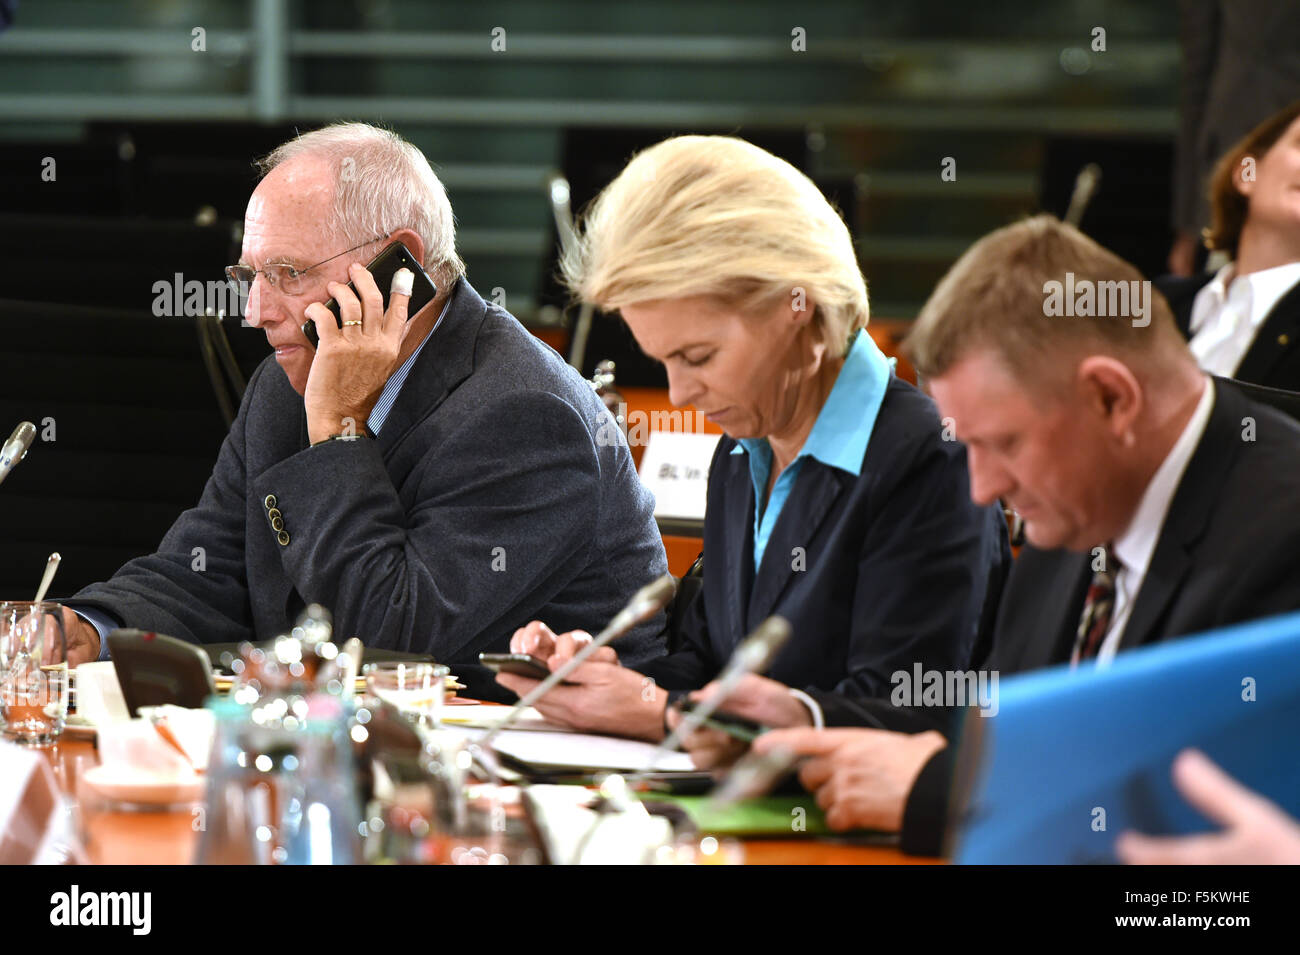 Berlin, Germany. 5th Nov, 2015. German Finance Minister Wolfgang Schaeuble (CDU, l-r), Defence Minister Ursula von der Leyen (CDU) and Minister of Health, Hermann Groehe (CDU) sit next to each other during a joint meeting between the heads of the German regional governments and the German federal government at the Chancellery in Berlin, Germany, 5 November 2015. The members of the German federal government and heads of the regional governments came together to discuss further prodedures in the current refugee crisis. Photo: Soeren Stache/dpa/Alamy Live News Stock Photo